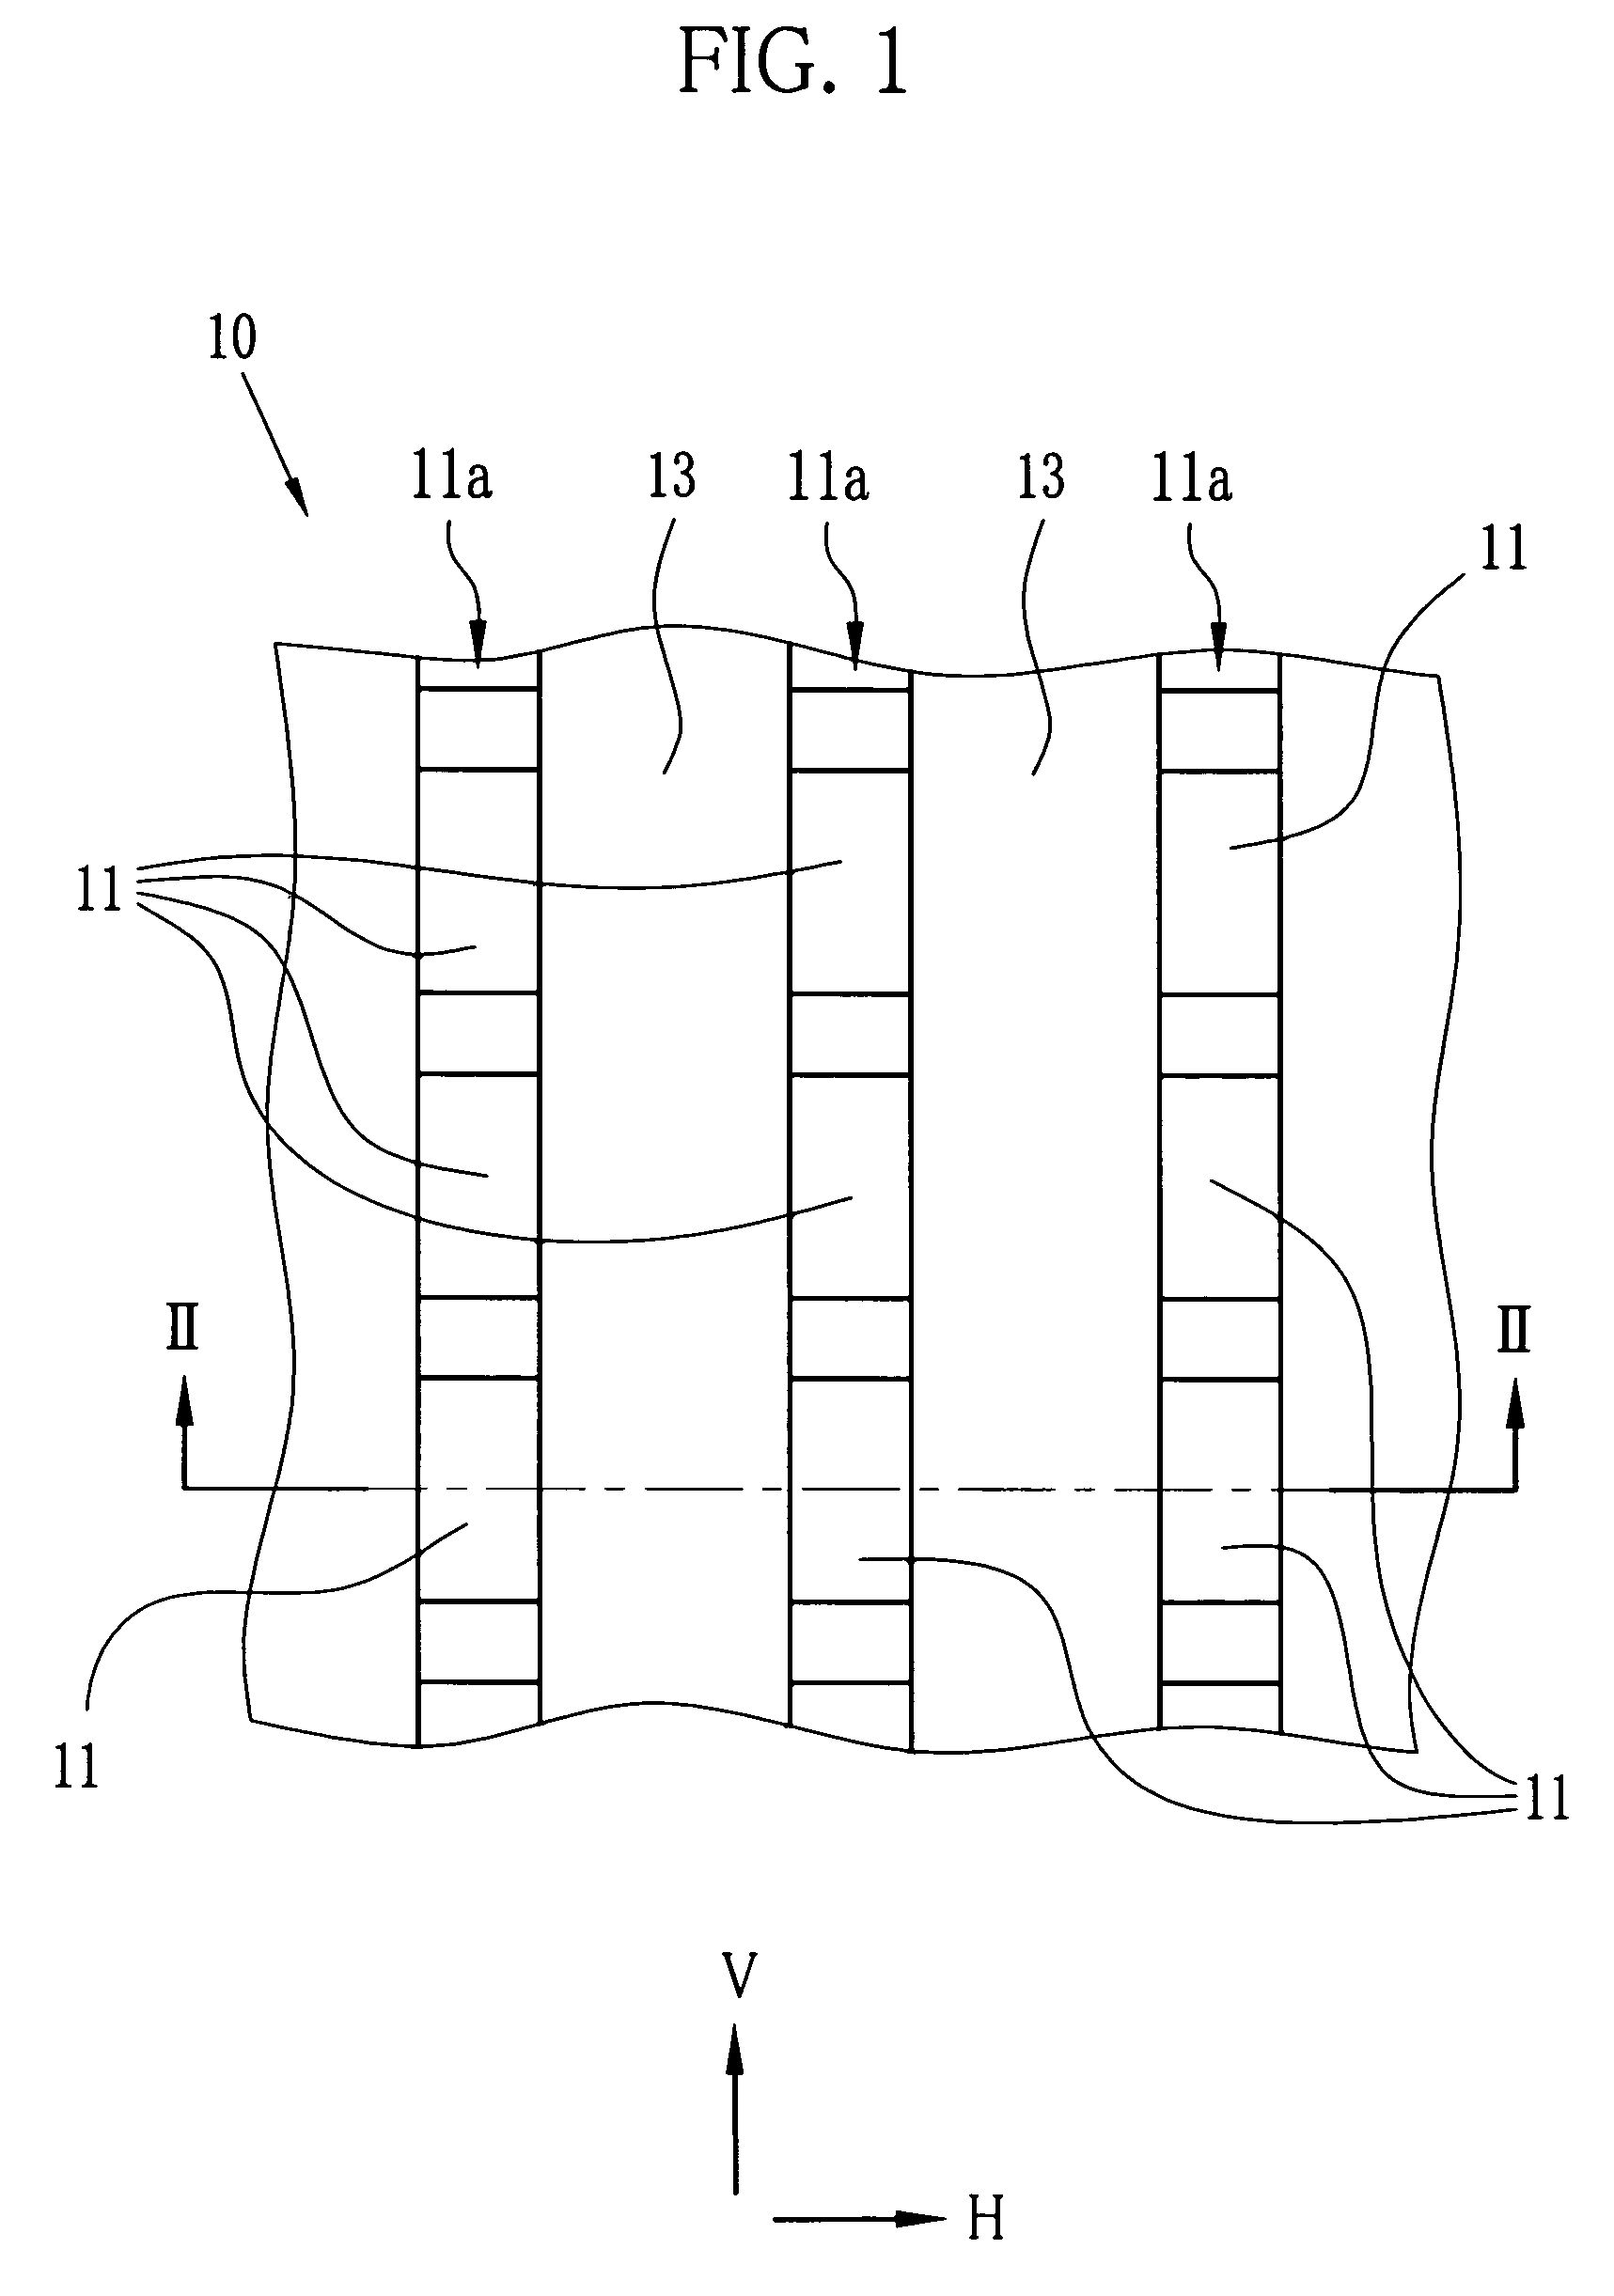 Solid state imaging device including a converging structure